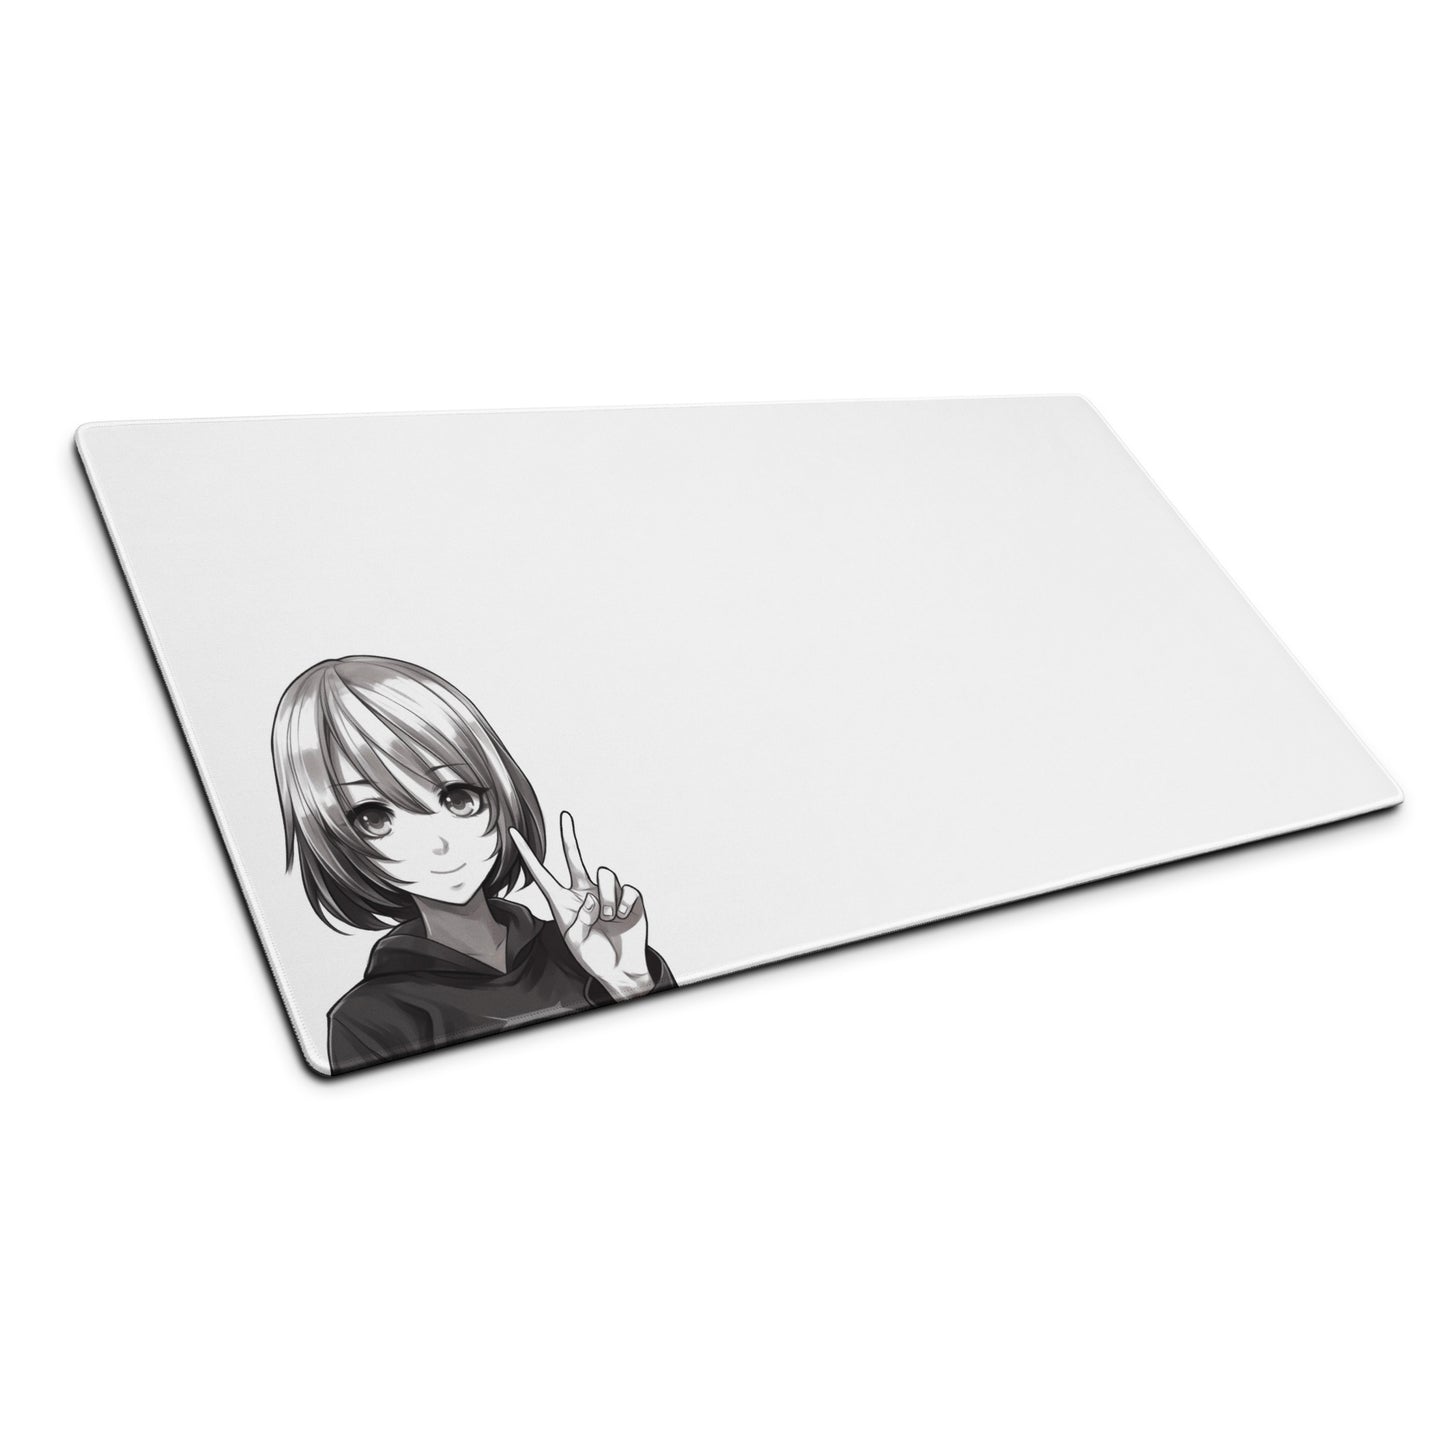 A 36" x 18" black and white desk pad with an anime girl making a peace sign sitting at an angle.